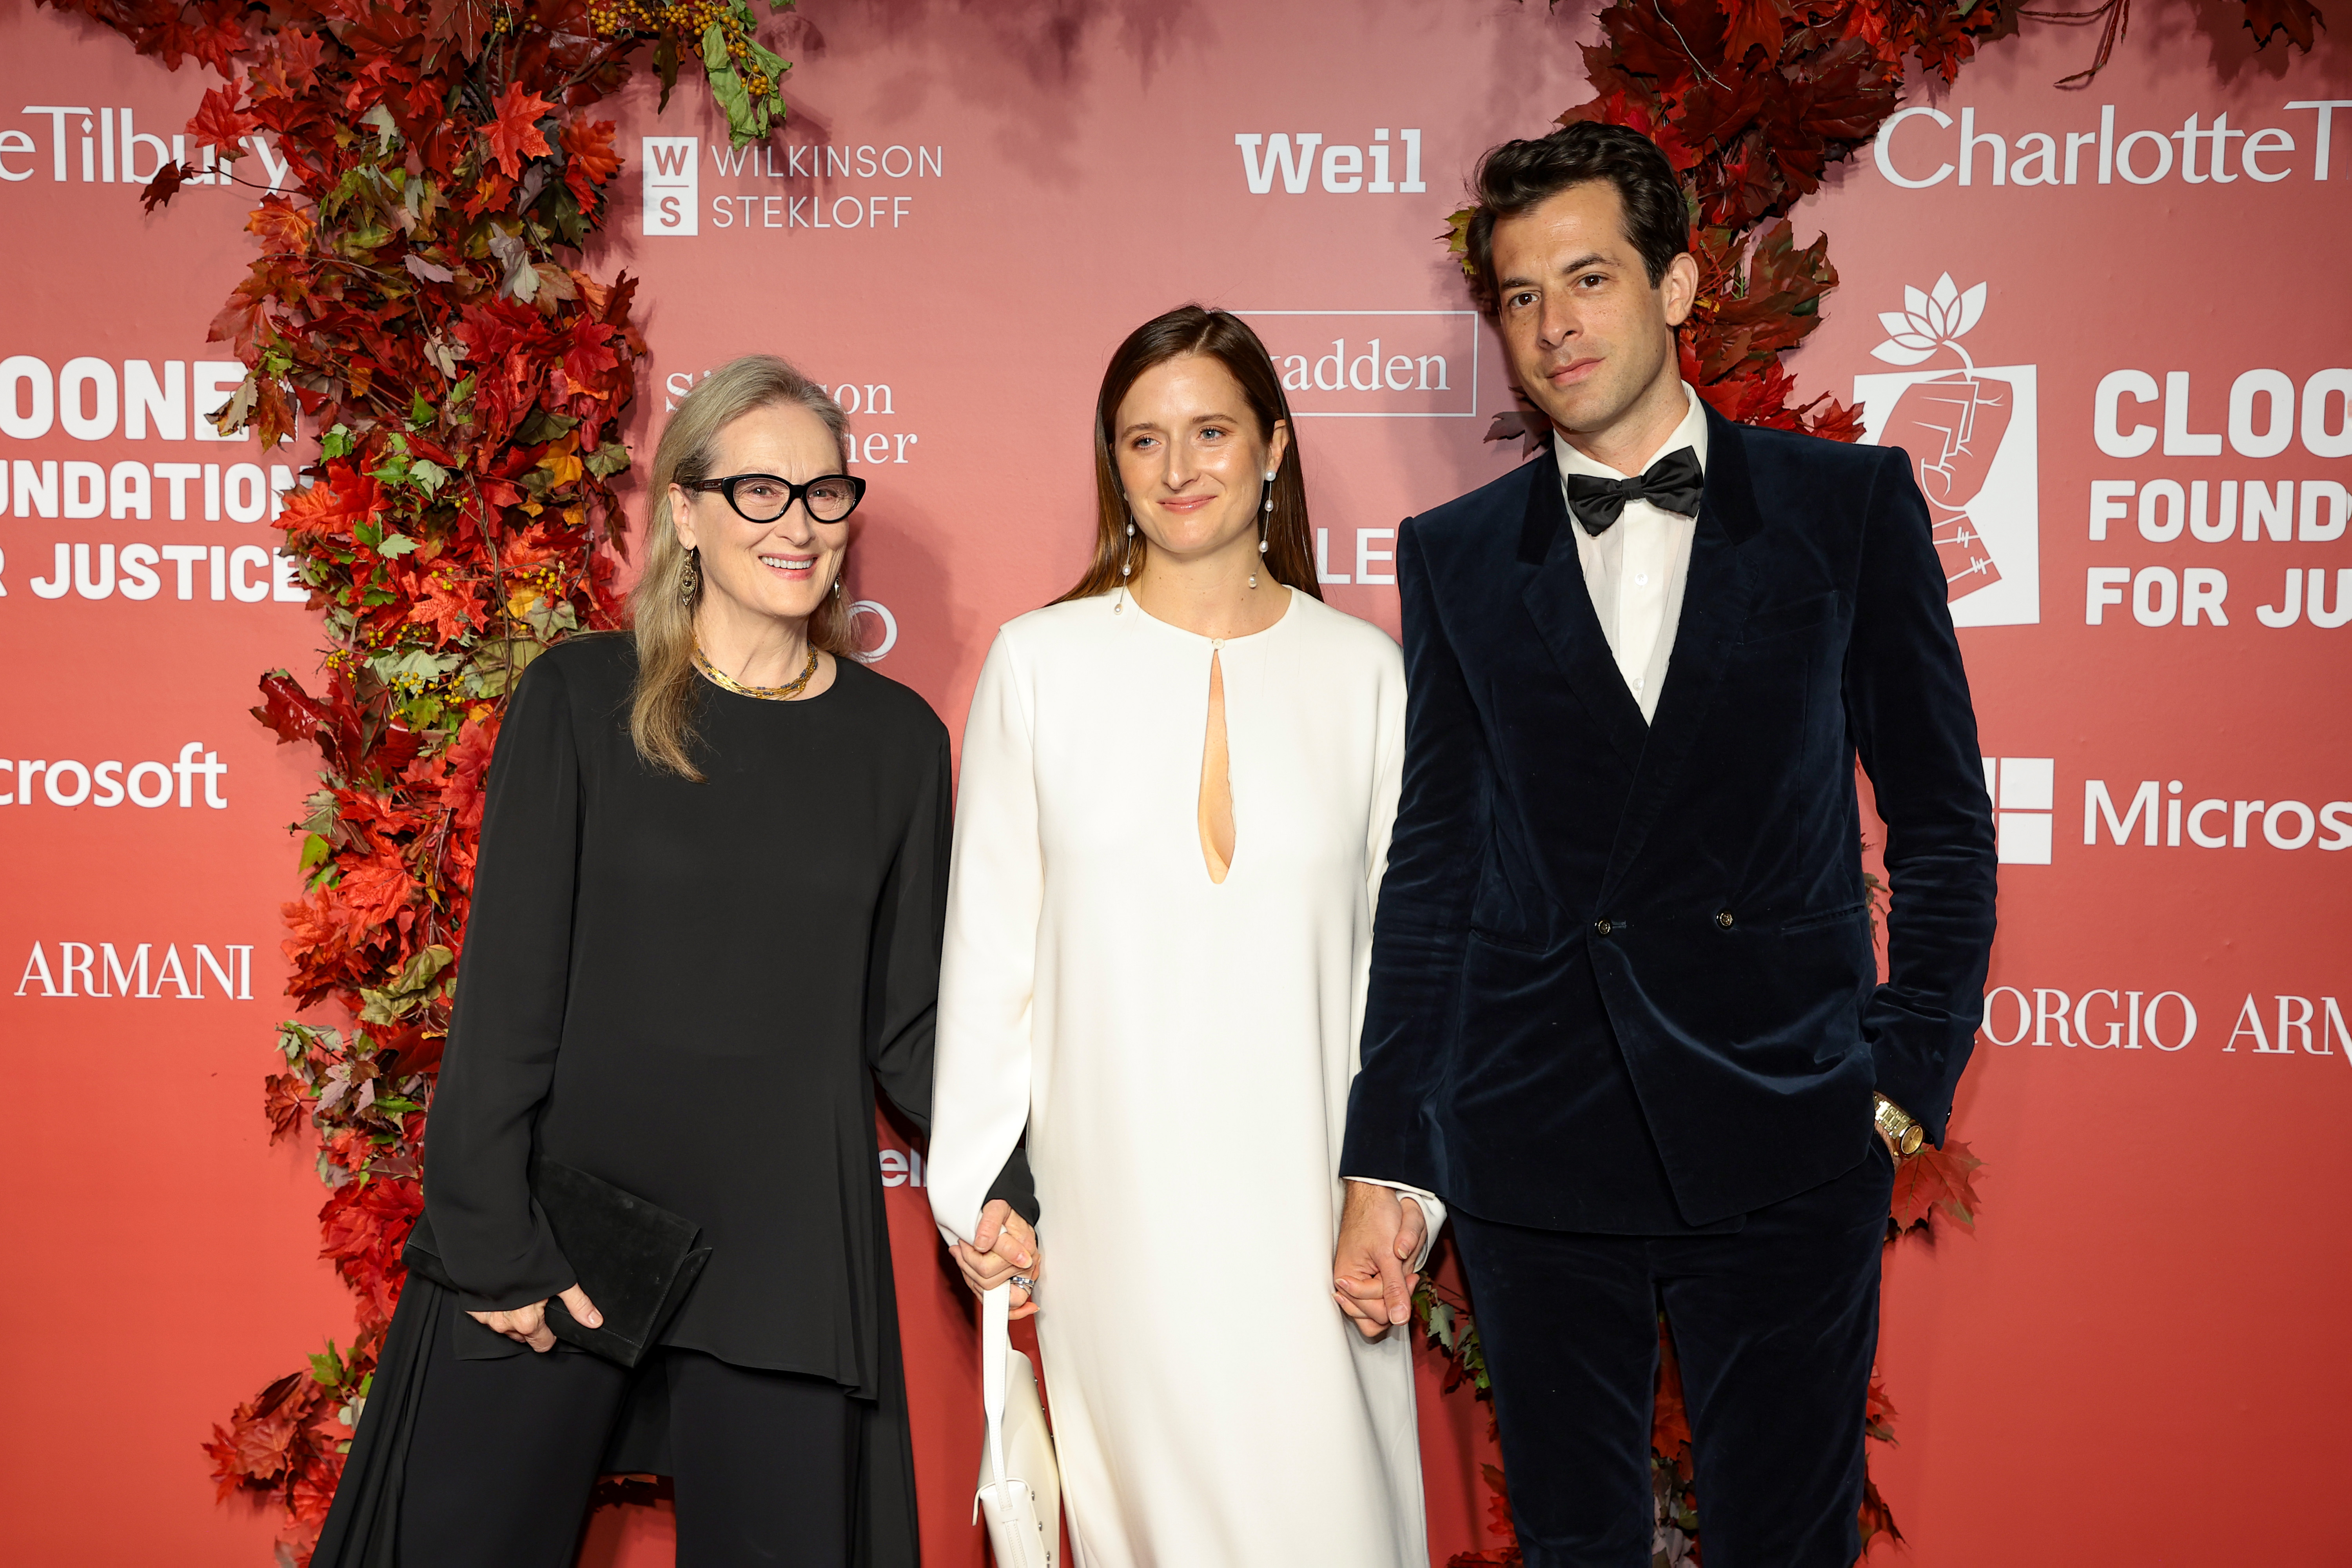 Meryl Streep, Grace Gummer, and Mark Ronson during the Clooney Foundation For Justice Inaugural Albie Awards at New York Public Library on September 29, 2022, in New York City. | Source: Getty Images